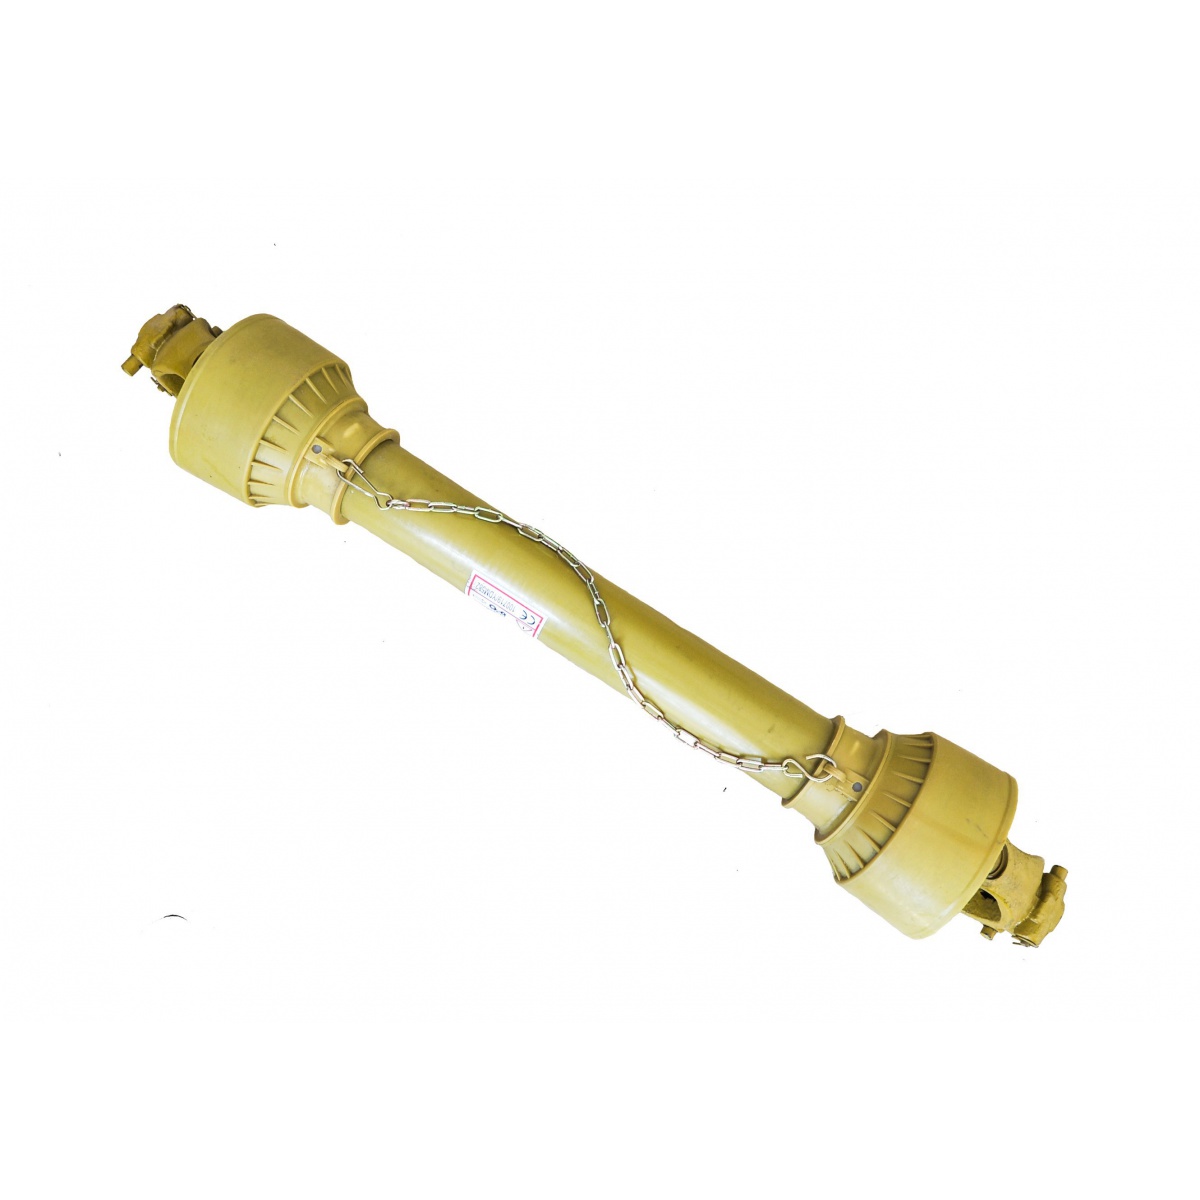 PTO shaft 07B - 120 cm / up to 105 HP